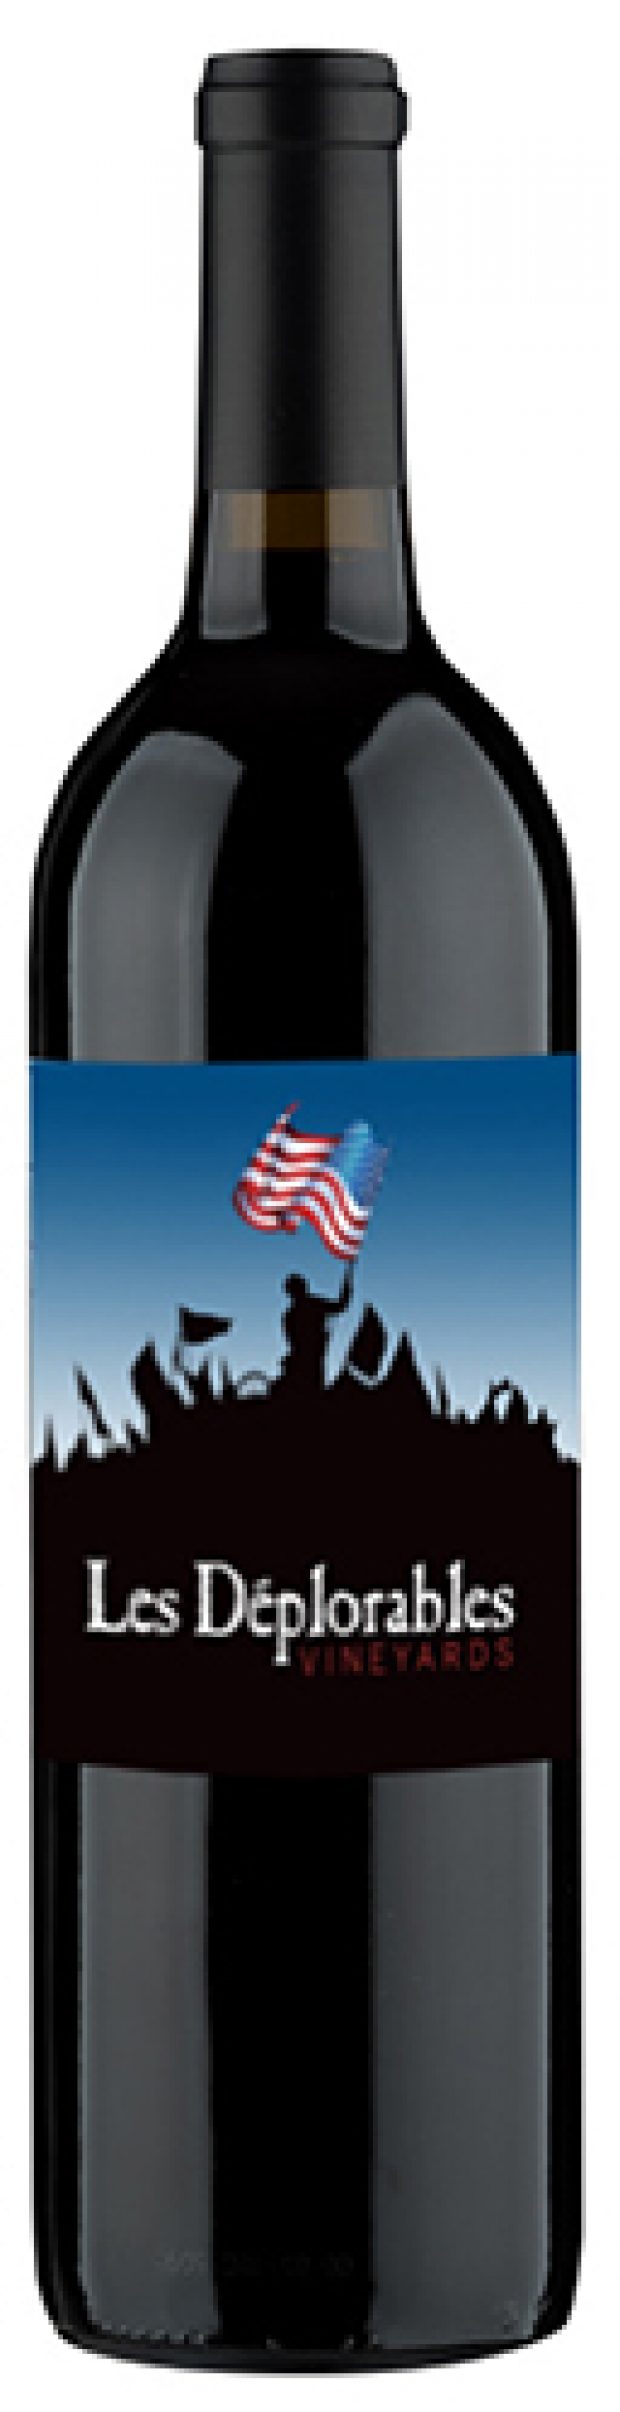 This 2014 cab was made in the U.S.A.